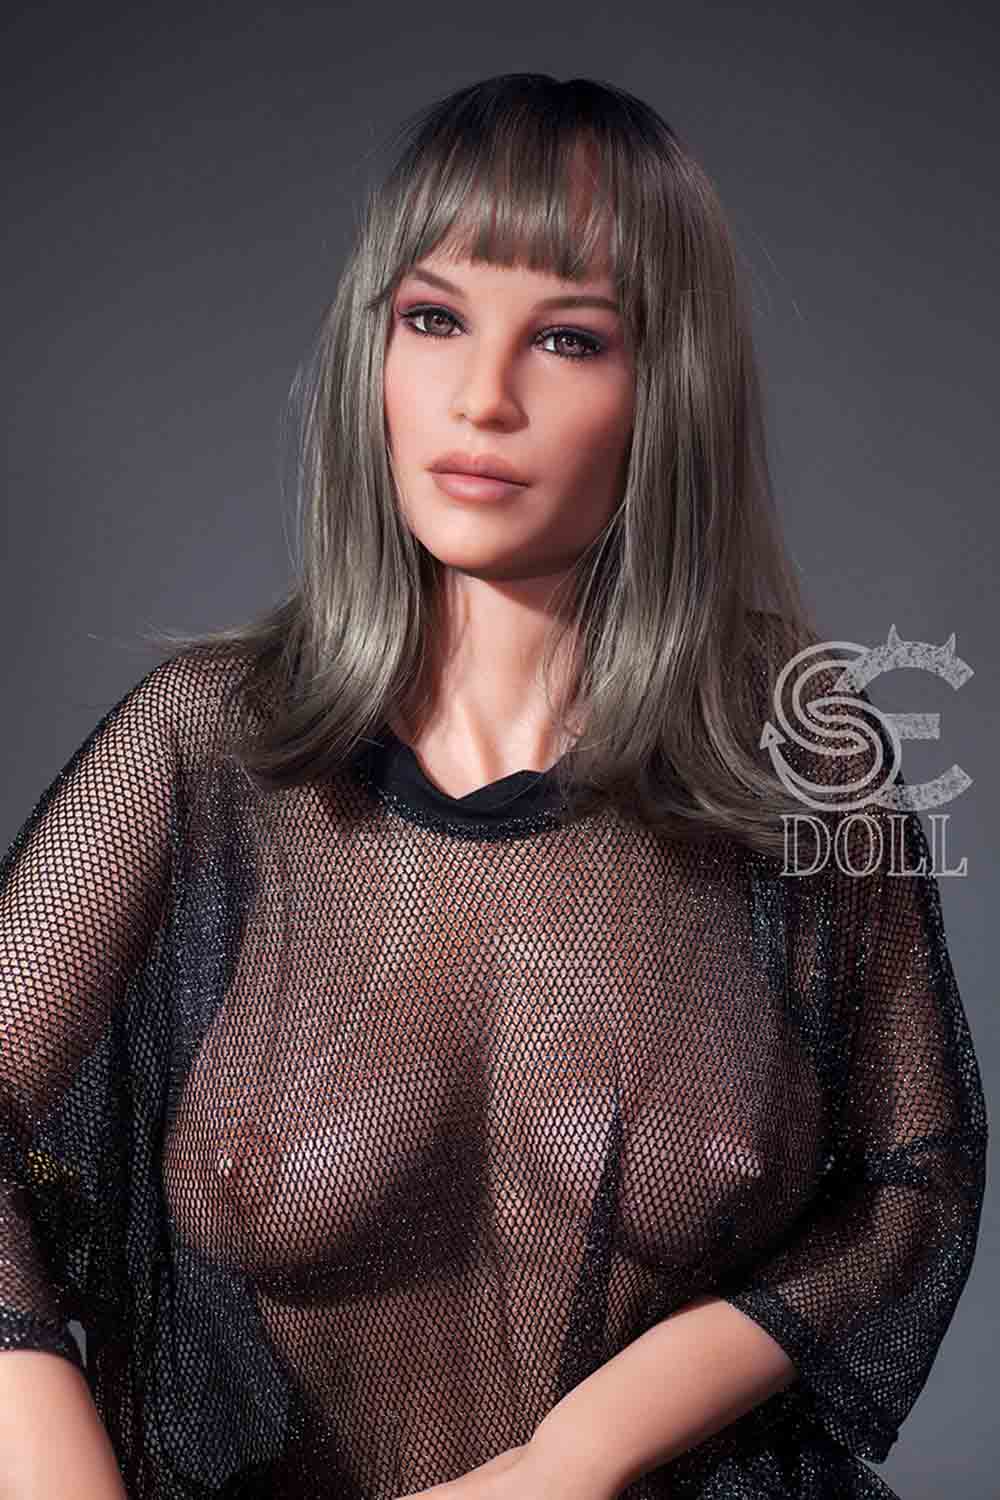 SEDOLL 167cm(5ft6) G-cup TPE Sex Doll   Andrea